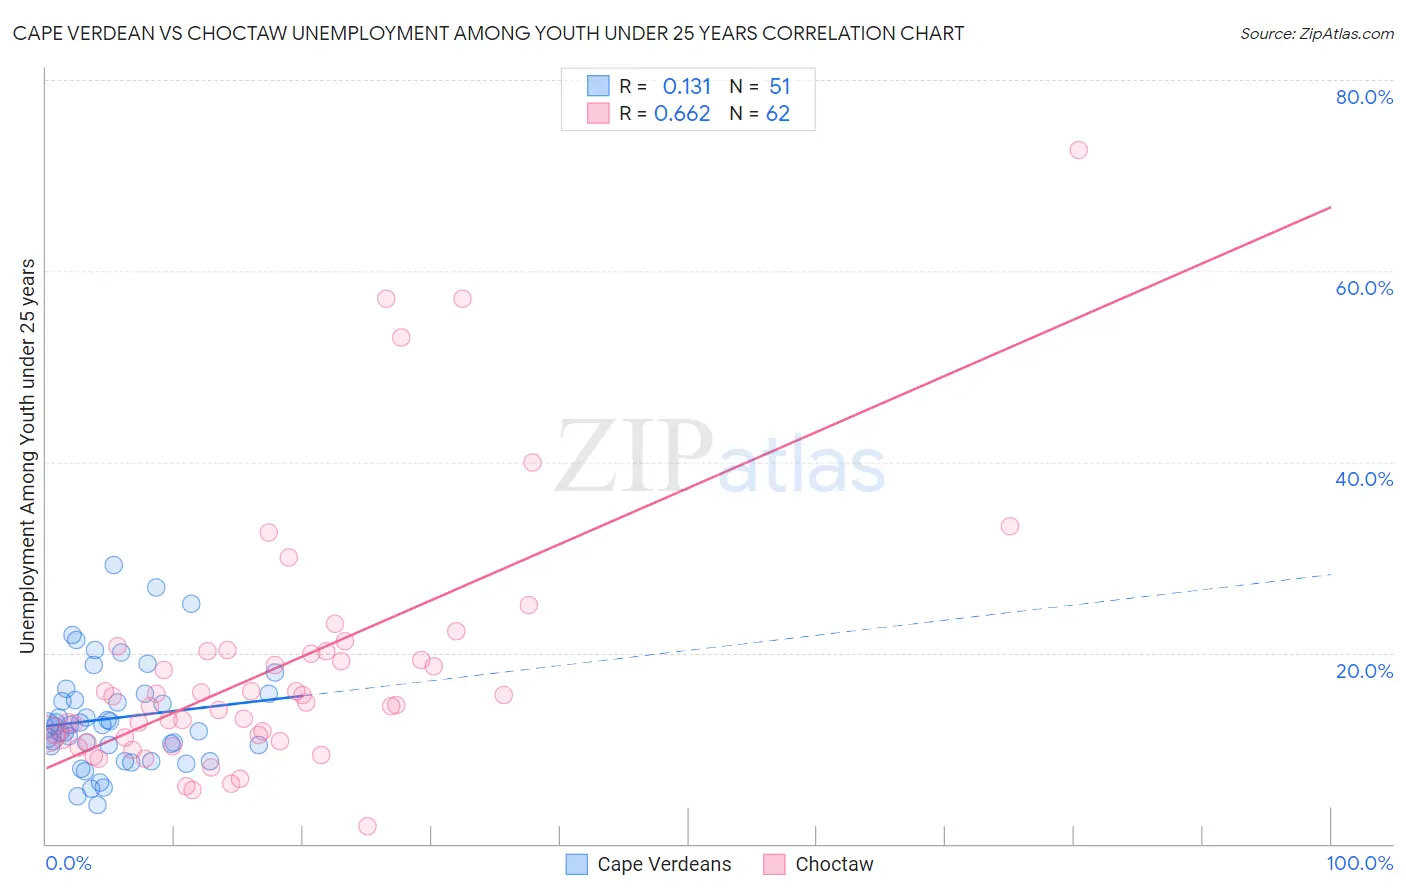 Cape Verdean vs Choctaw Unemployment Among Youth under 25 years